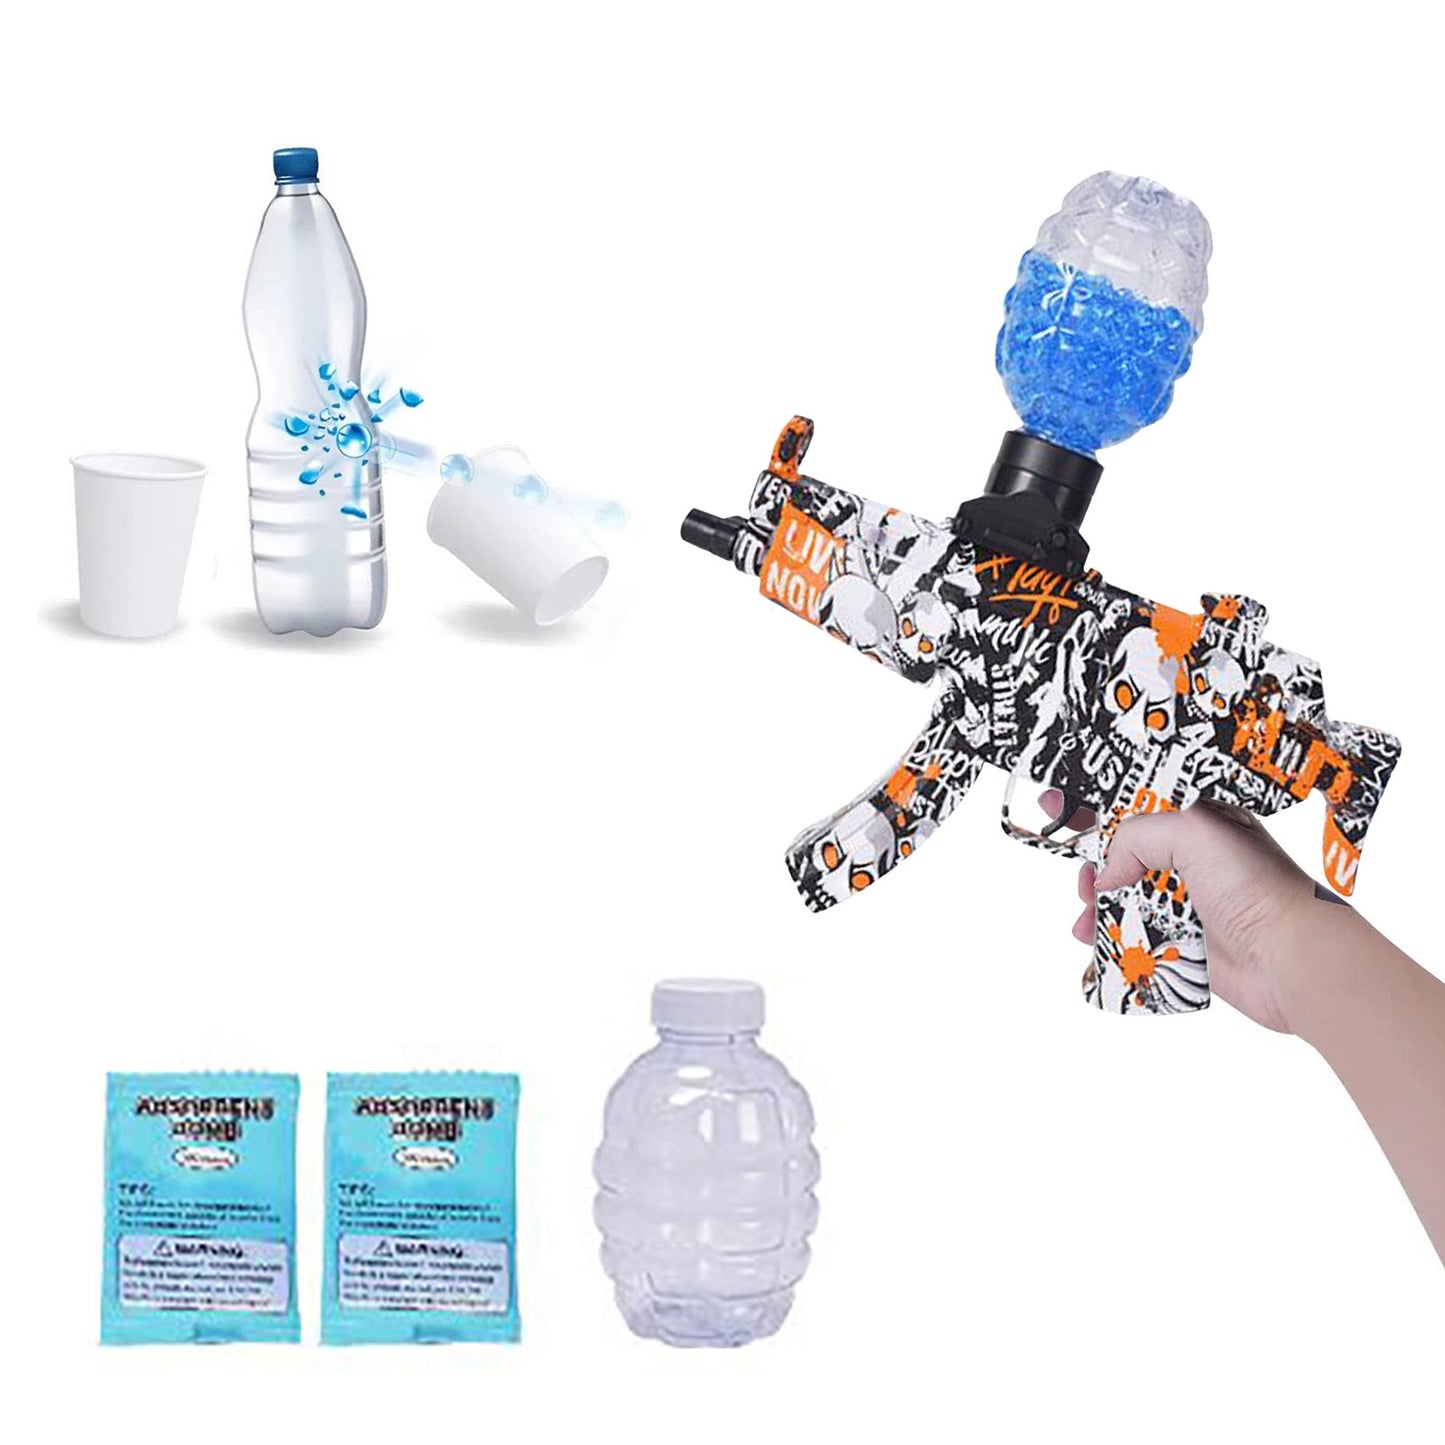 Electric Gel Ball Blaster - SuperMEADE | AMAZING gifts and products!!